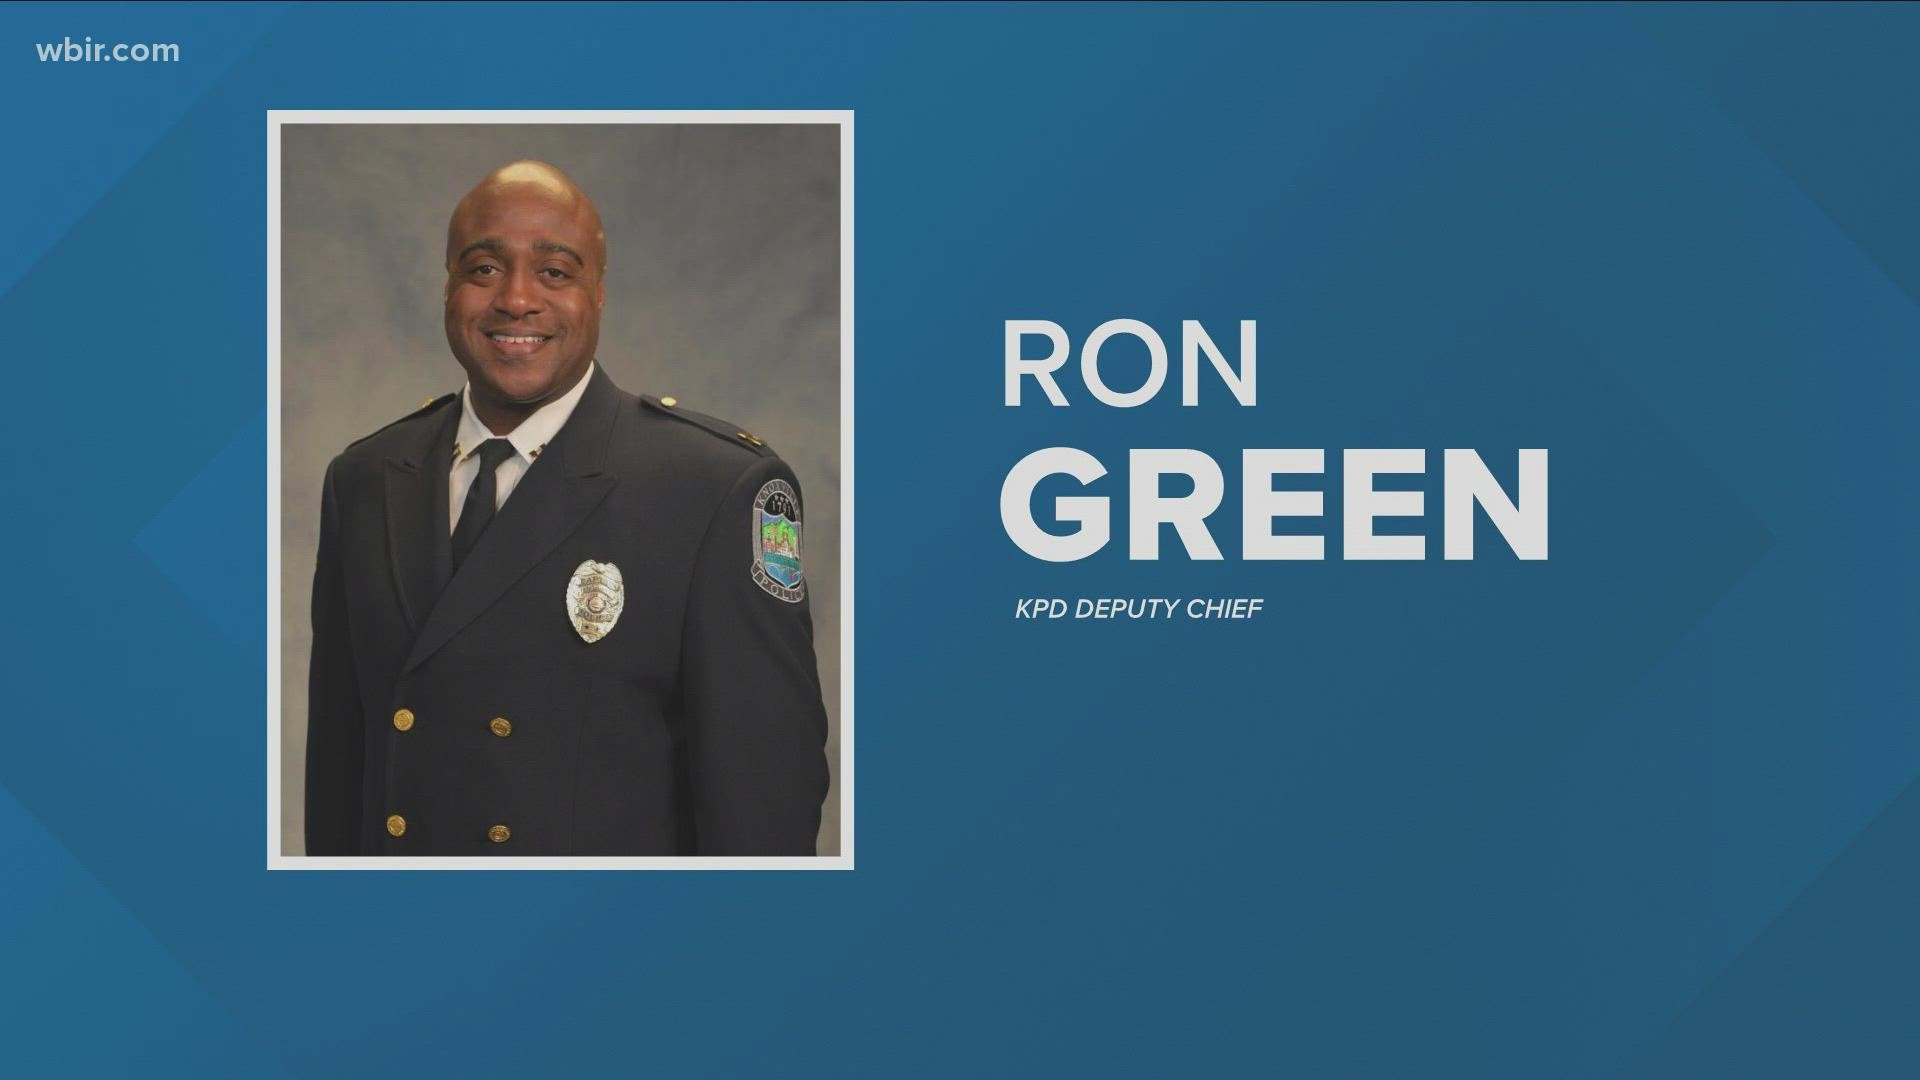 Deputy Chief Ron Green abruptly retired in December while under investigation. New documents reveal the extent of the allegations against him.